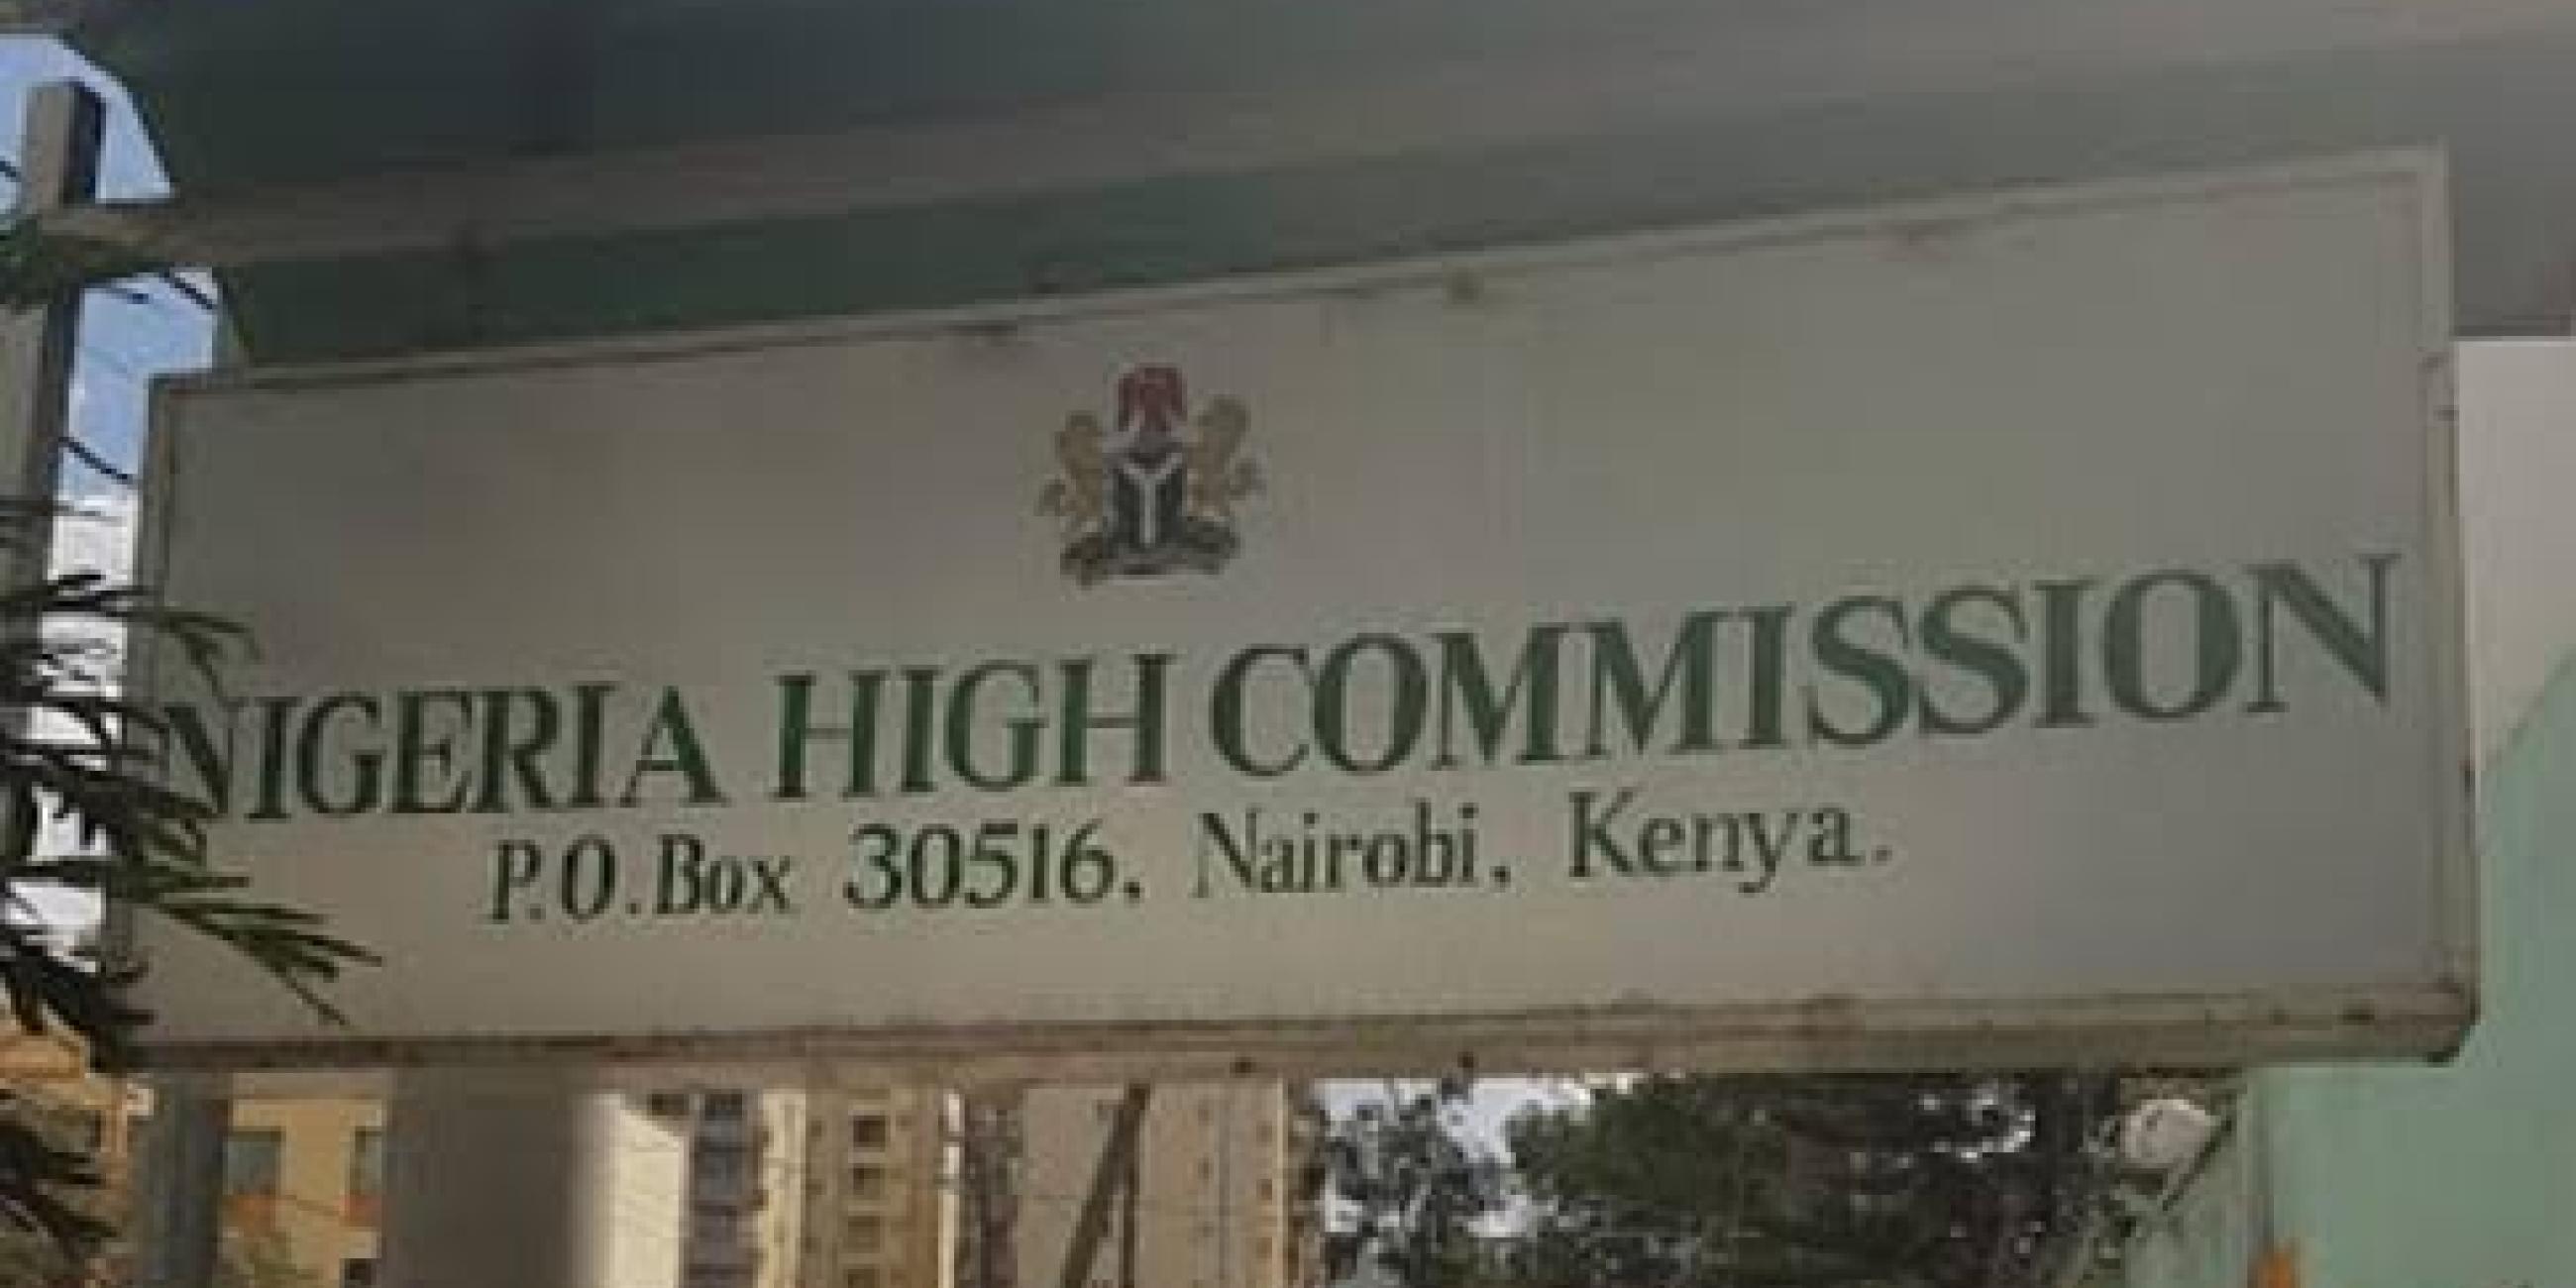 Nigerian Missionary Narrates How Nigeria's High Commission In Kenya ...